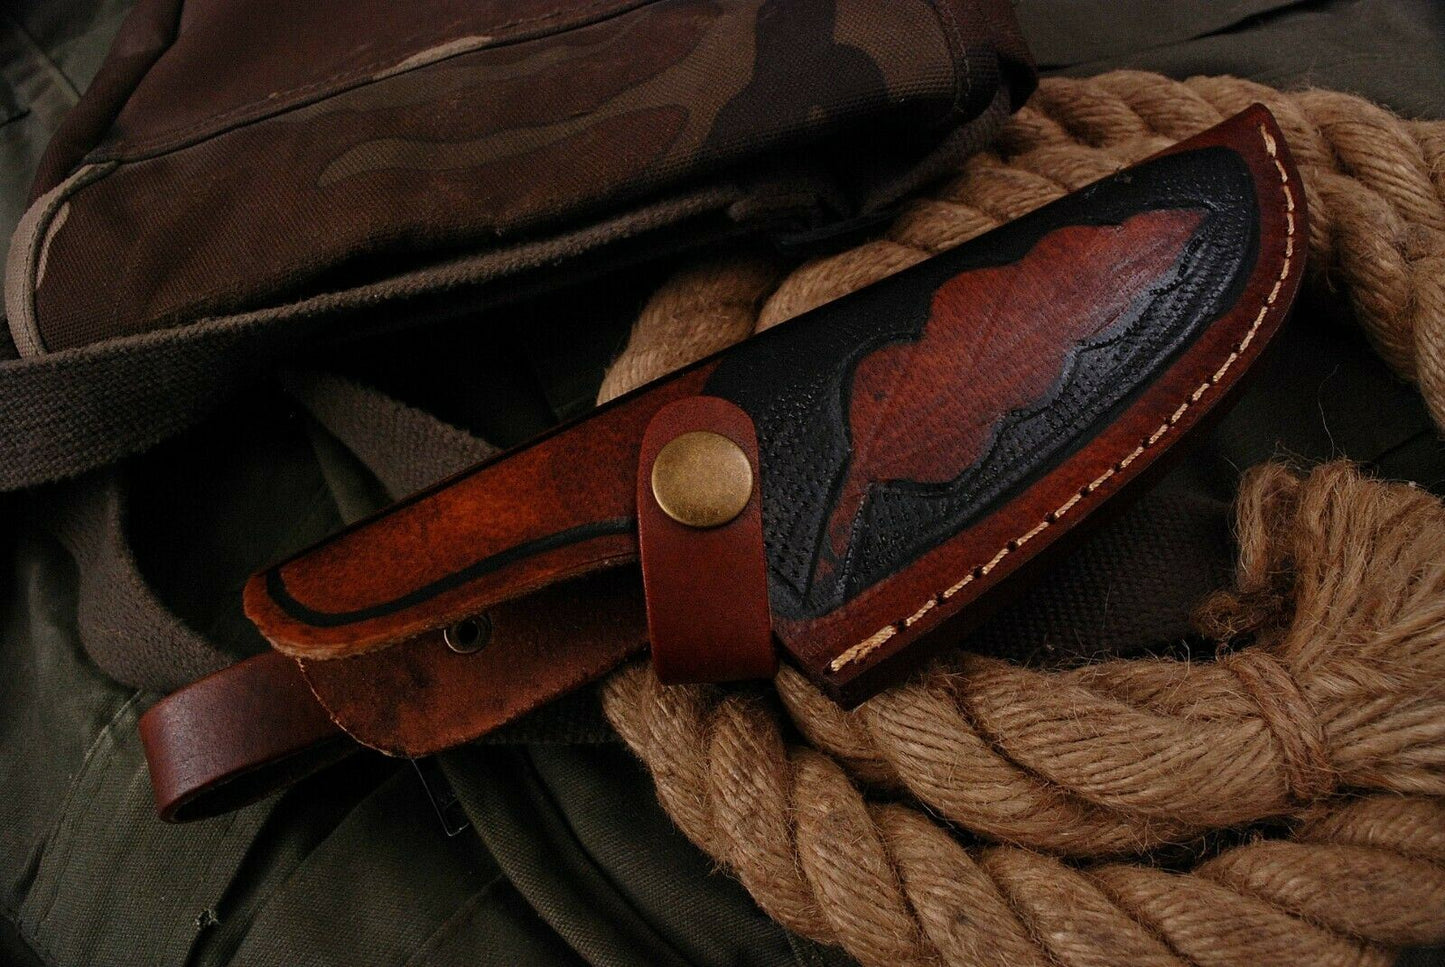 HANDMADE PURE Leather Hand Crafted BELT SHEATH Holster For FIXED BLADE KNIFE